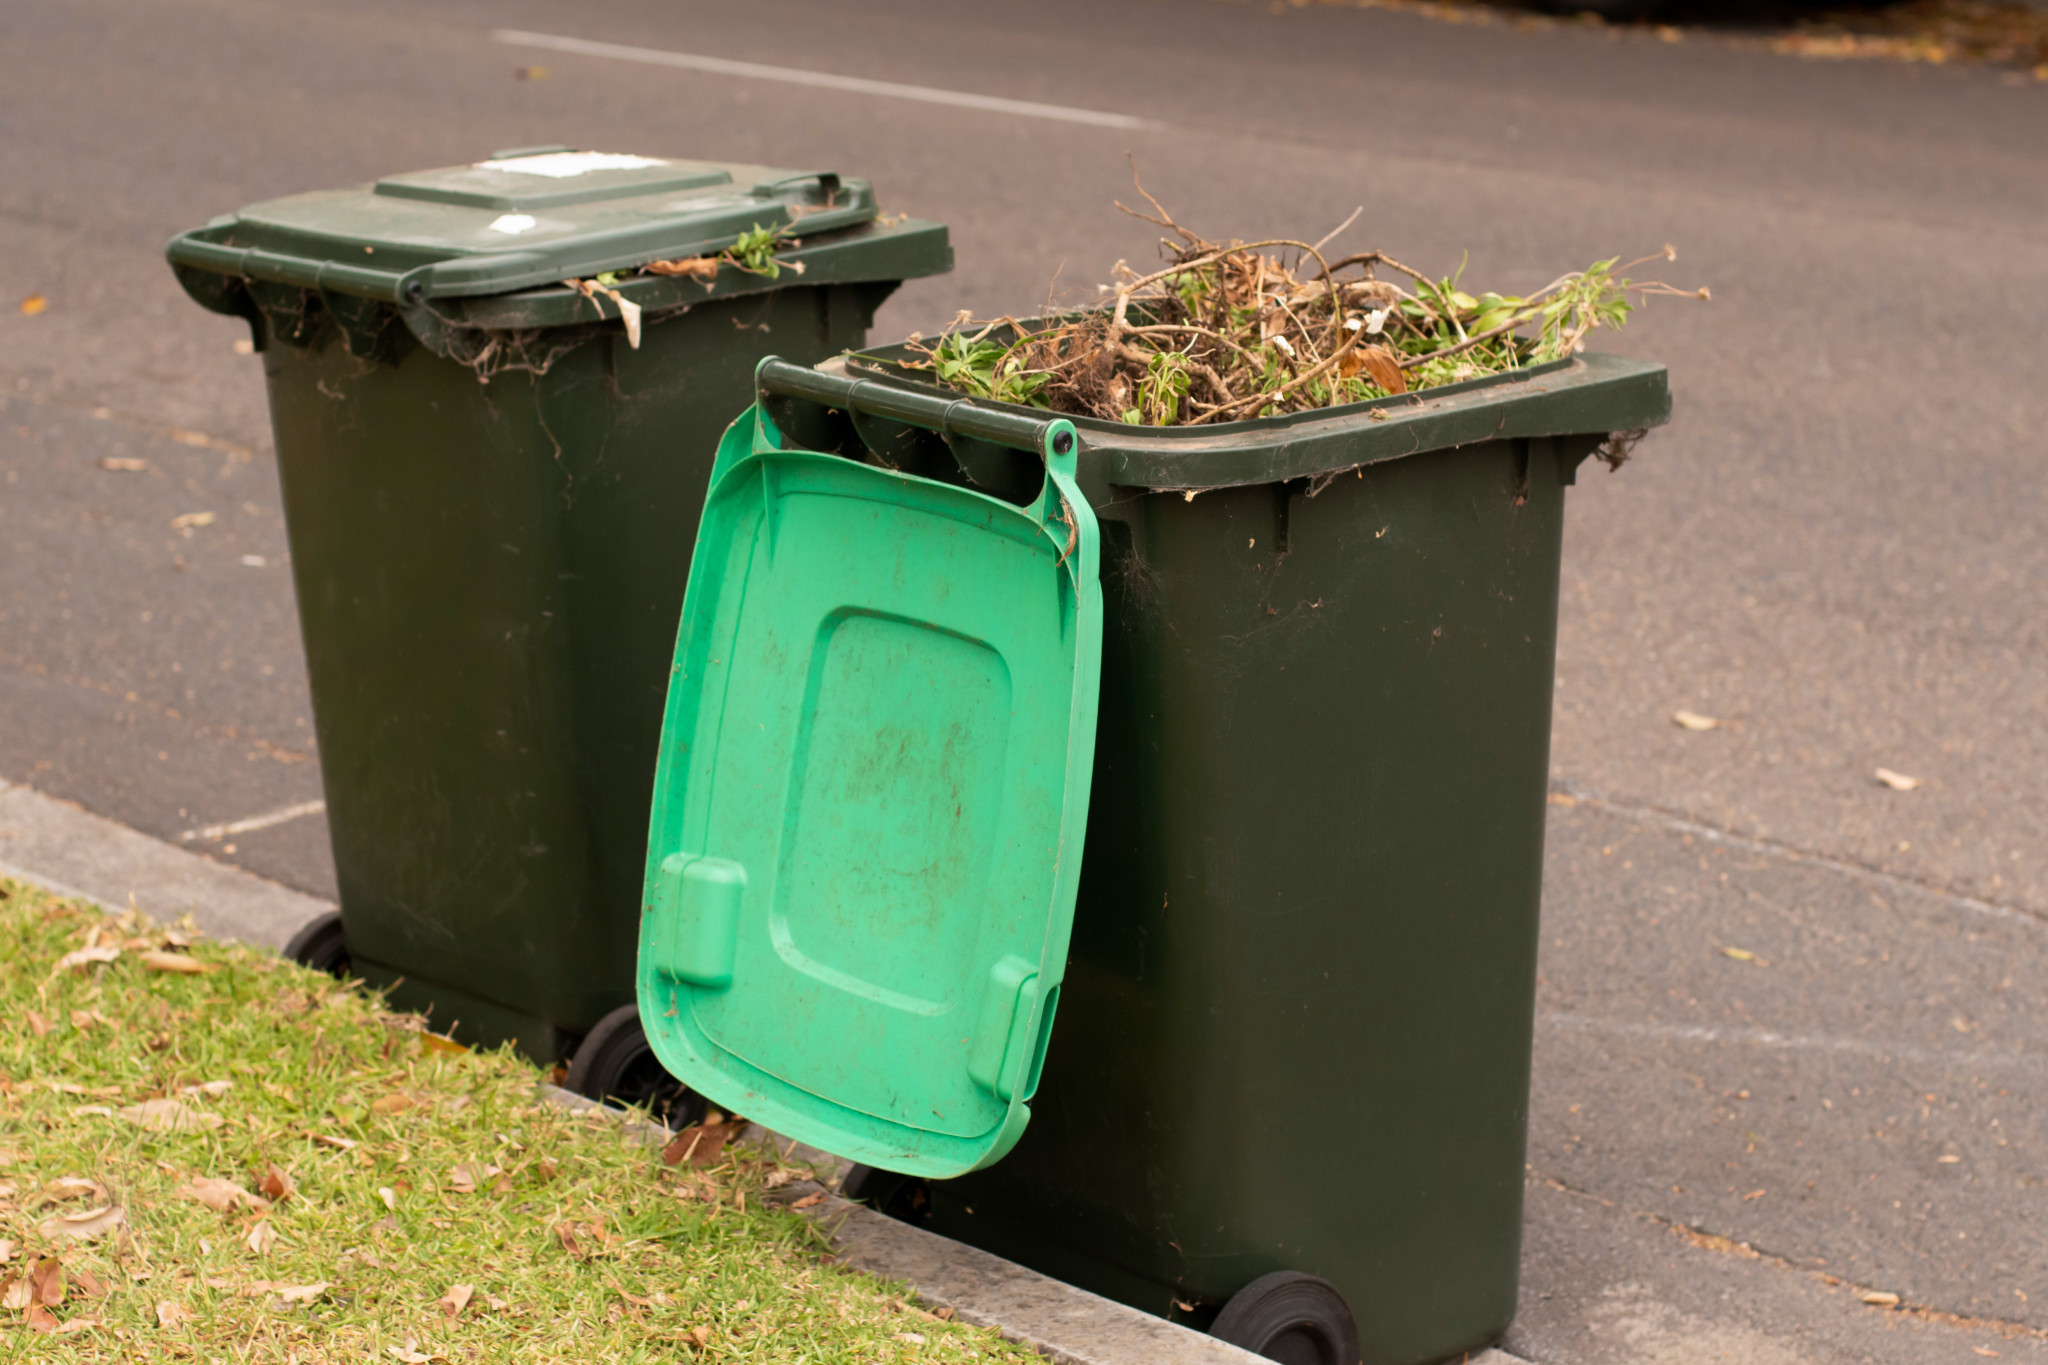 Free green waste days - feature photo